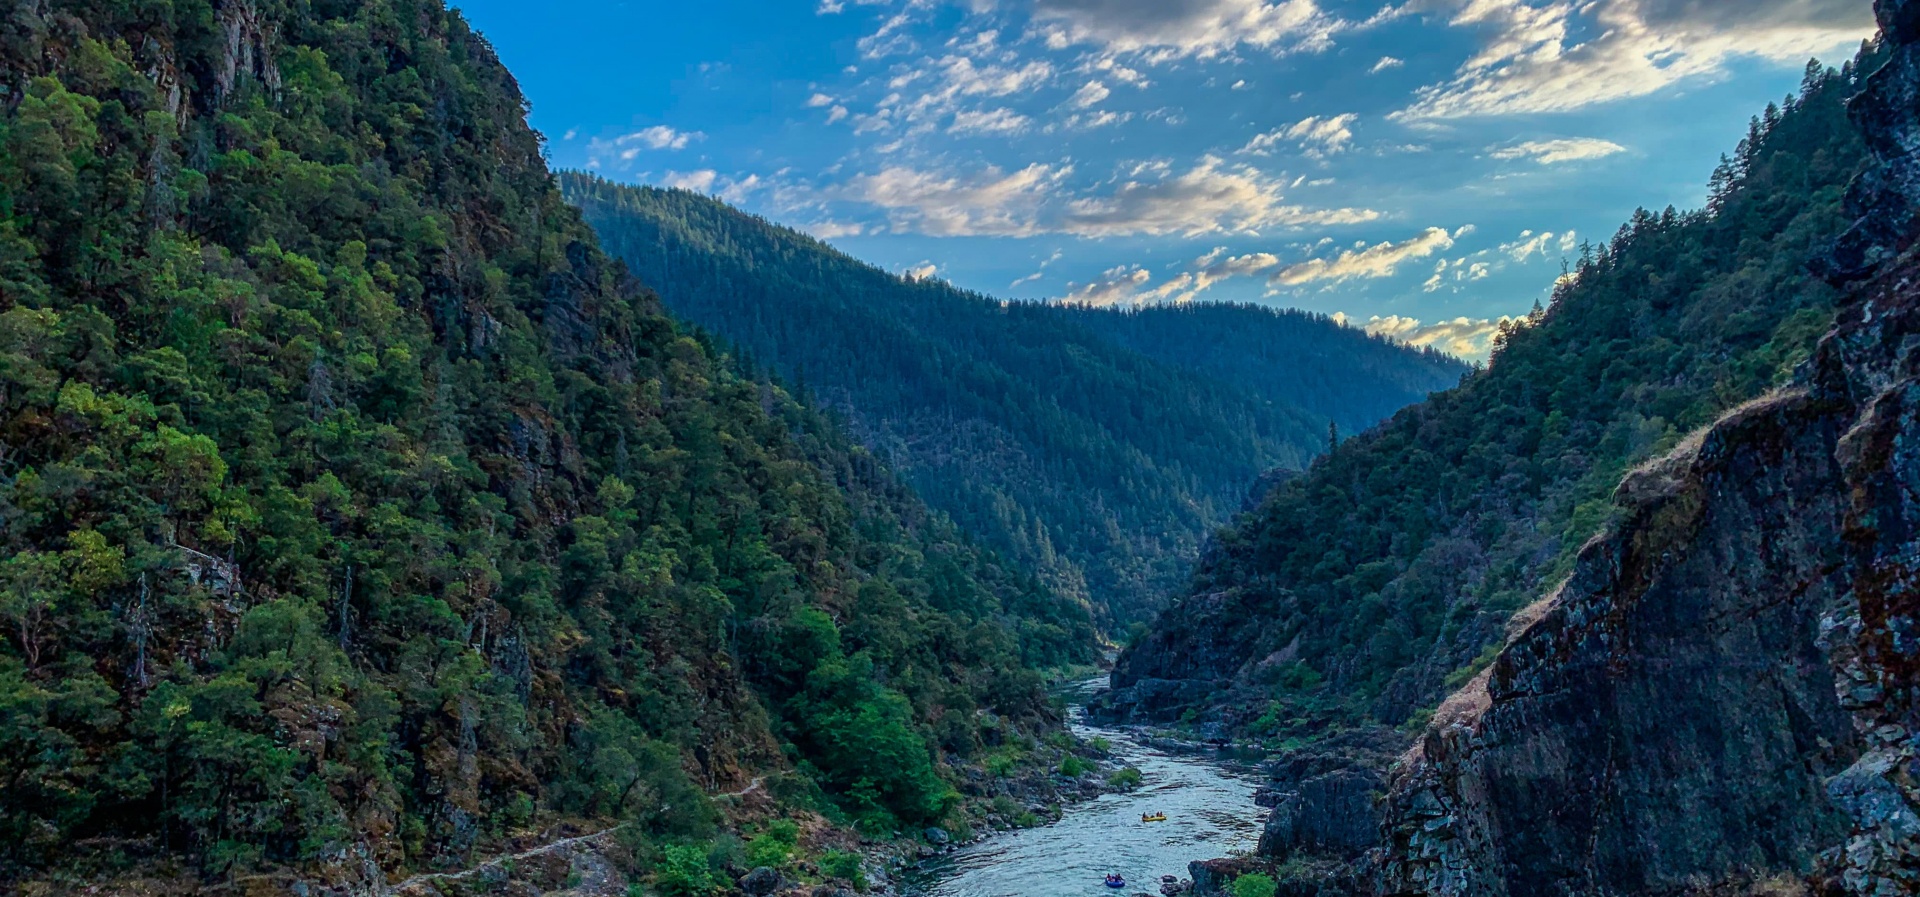 Row Your Own raft, Wild and Scenic Rogue River